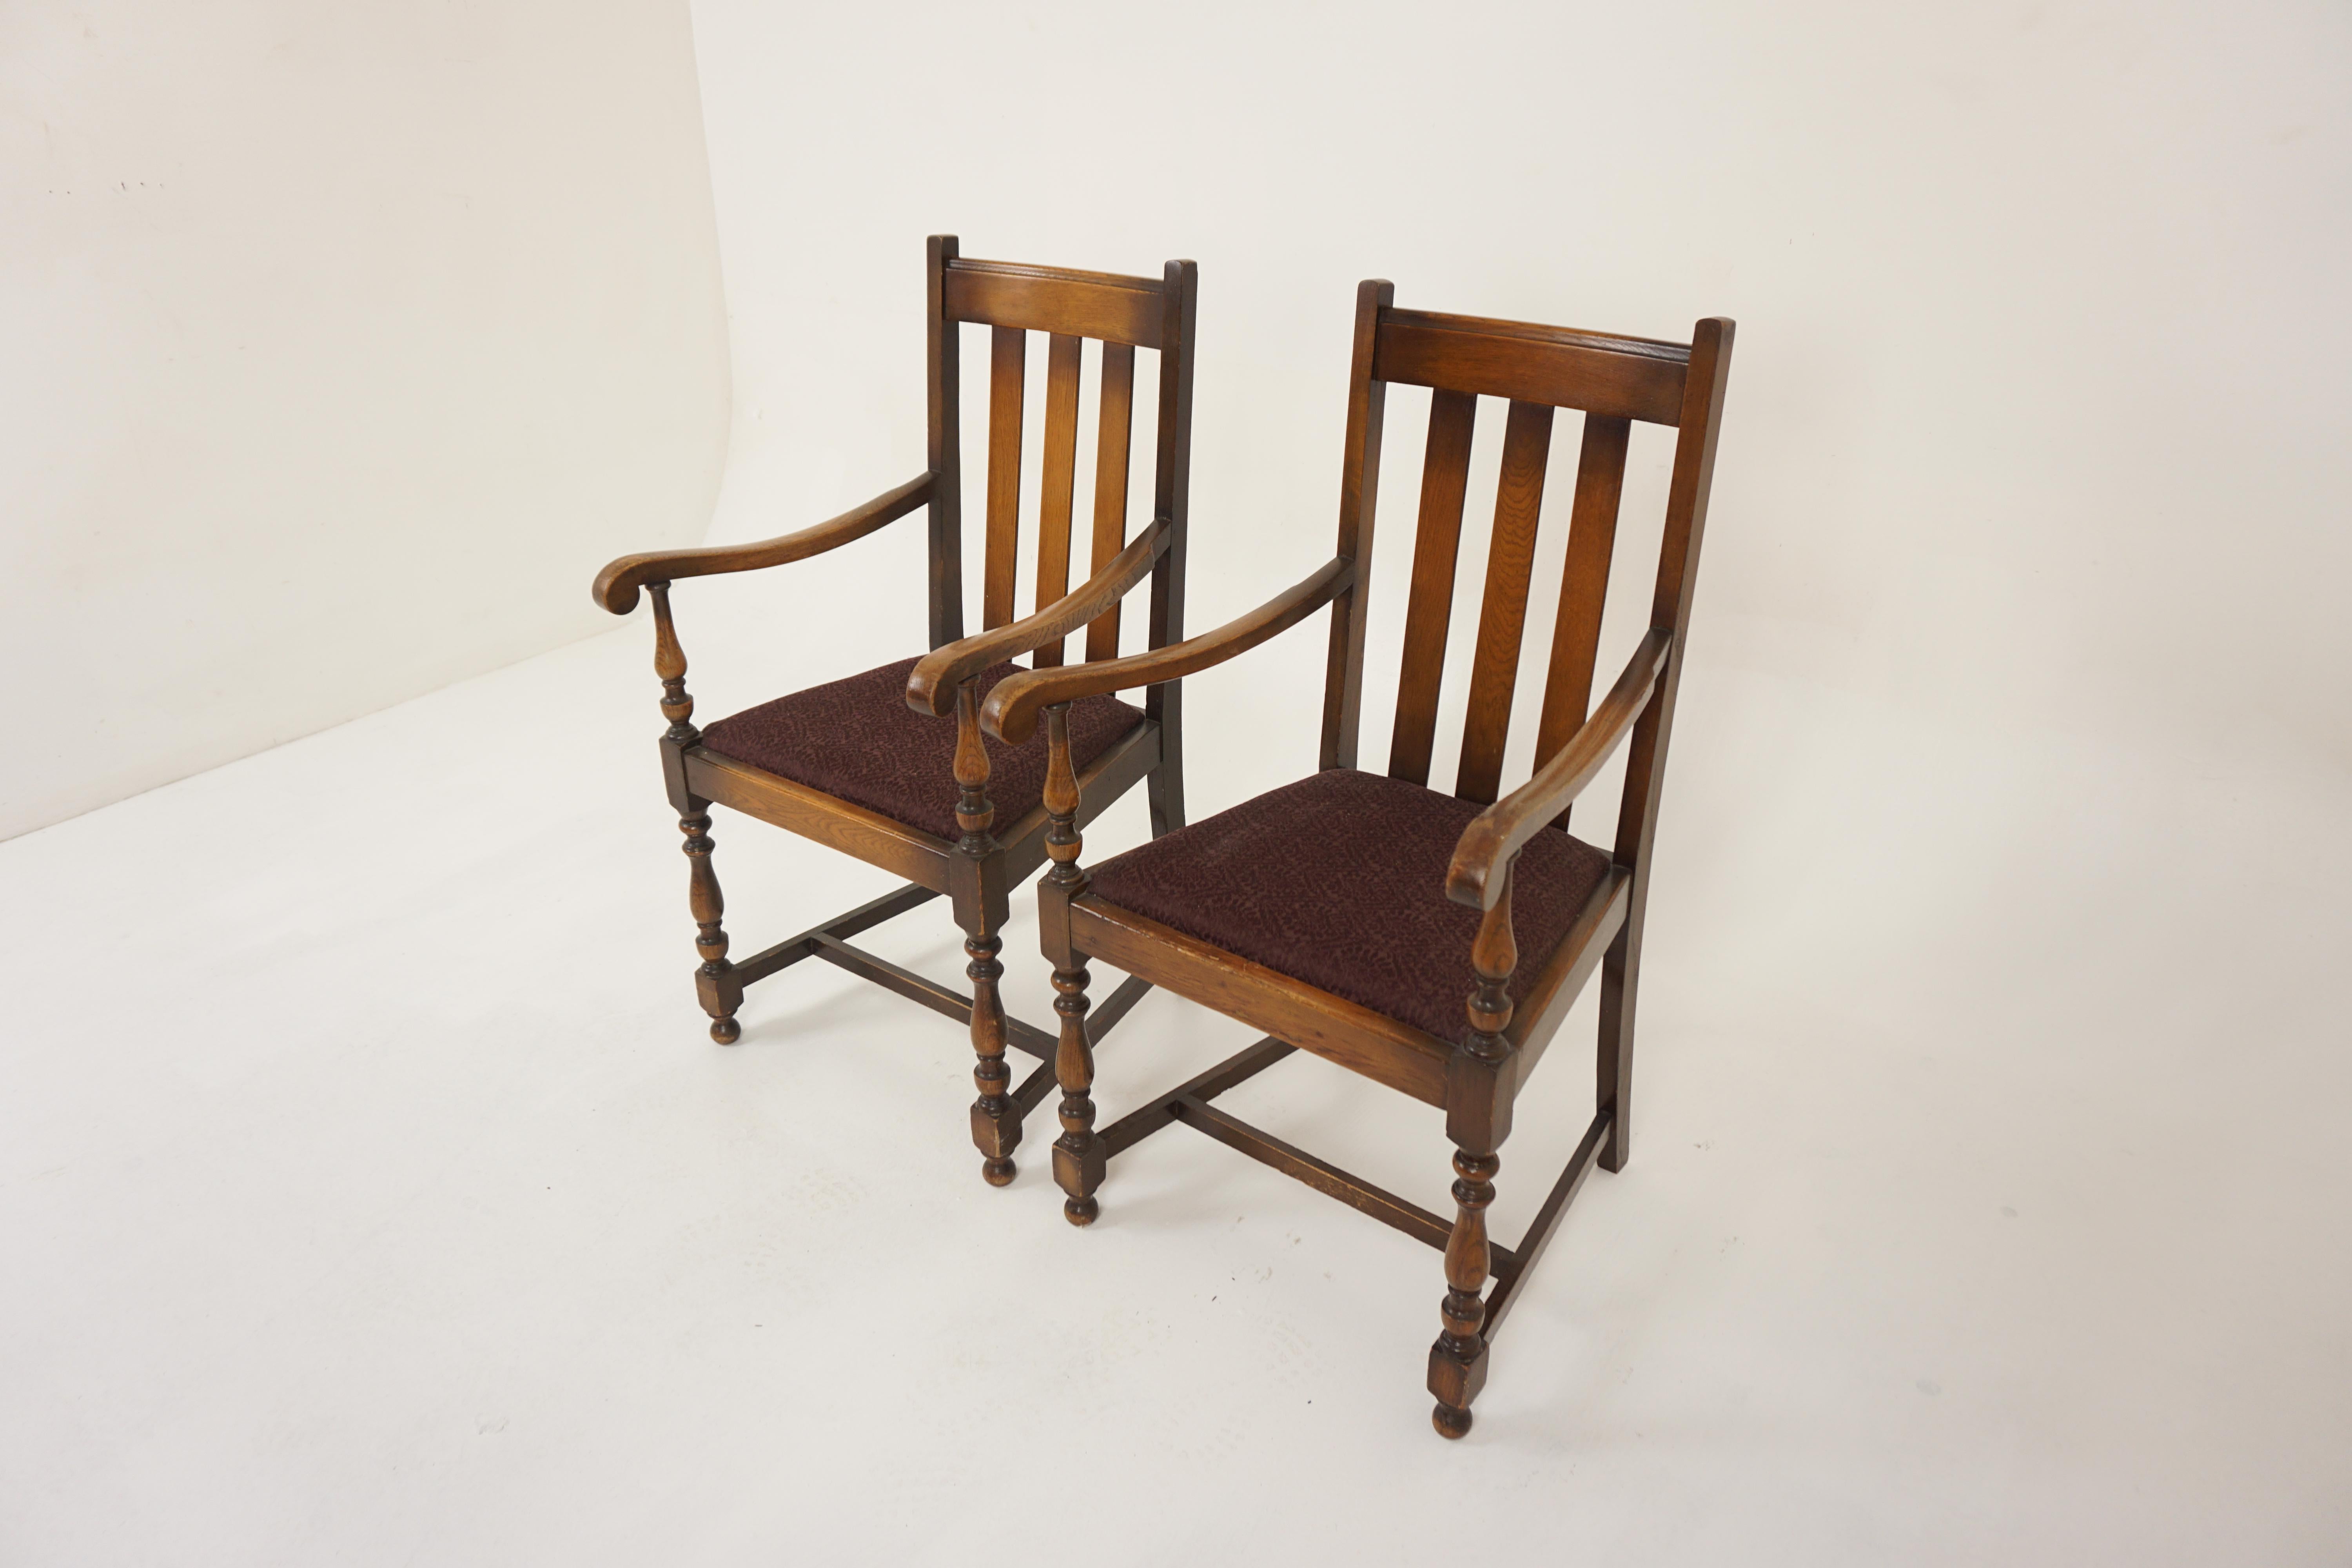 Pair Of Vintage Solid Oak High Back Chairs, Lift Out Seats, Scotland 1920, H1202 

Scotland 1920
Solid Oak
Original Finish
Top rail with three vertical slats
Upholstered seat lifts out making it easy to recover
All standing on turned legs to the